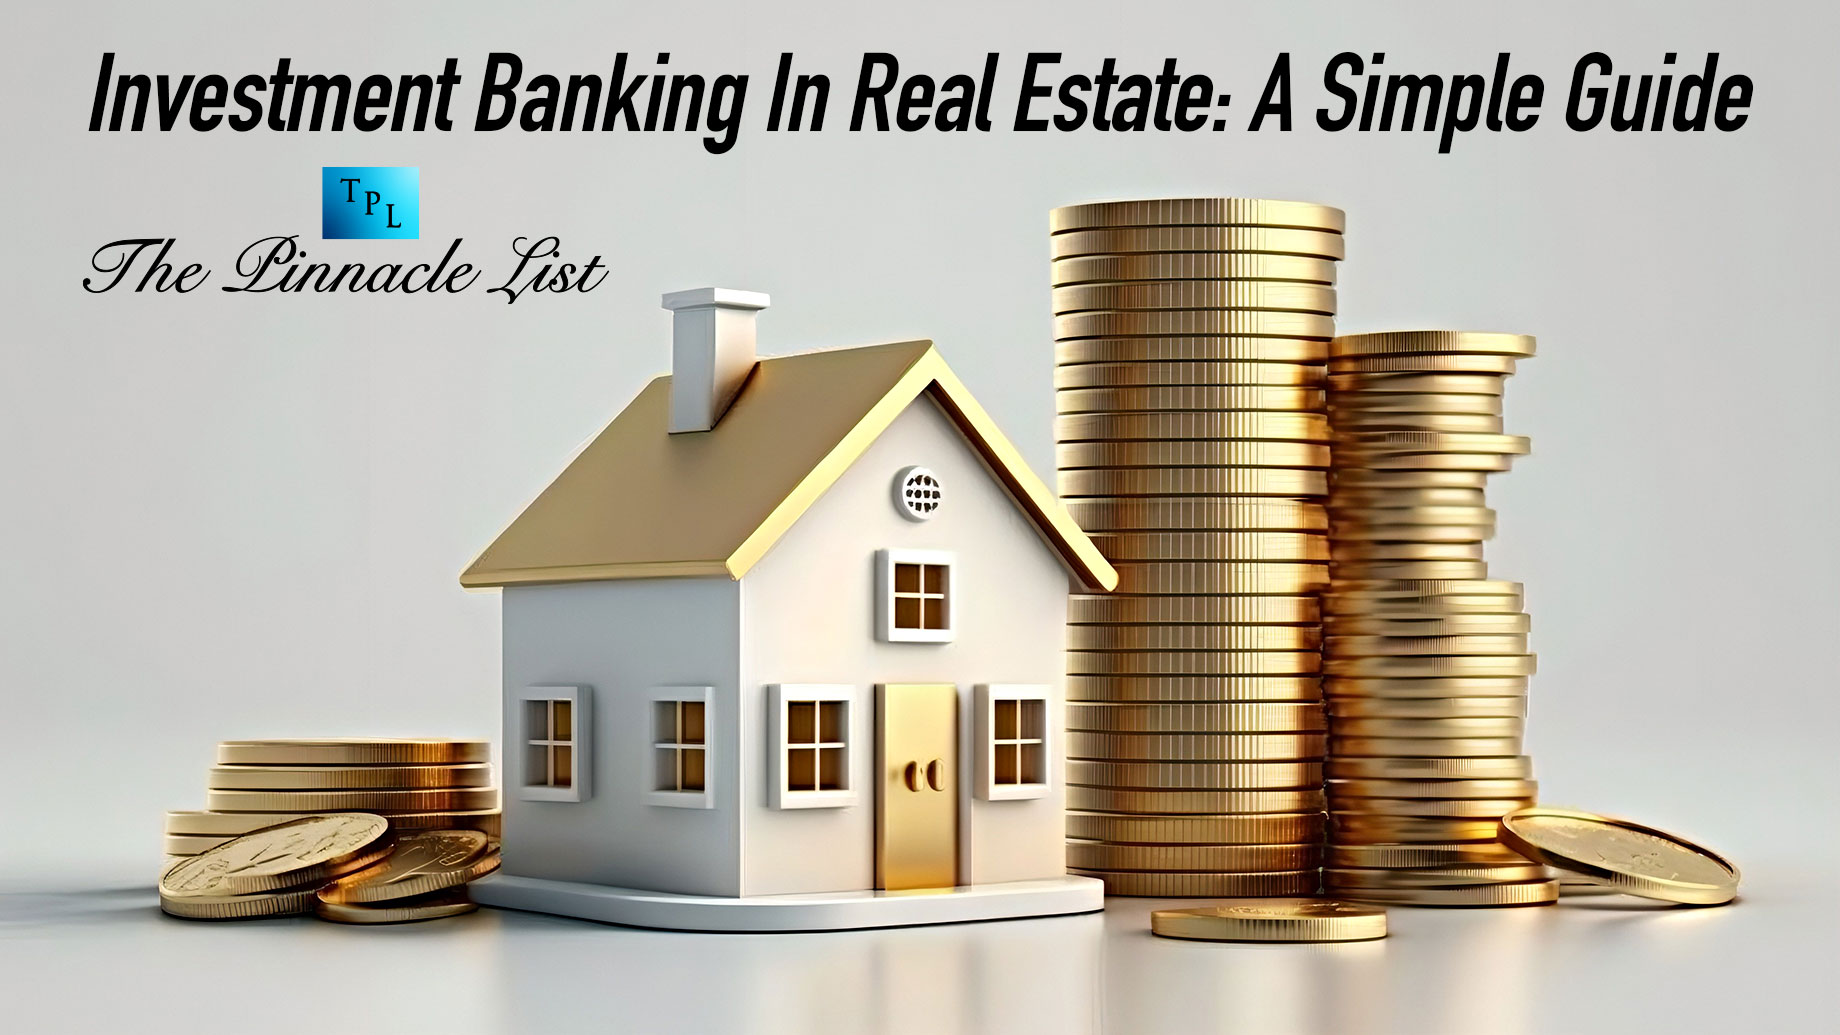 Investment Banking In Real Estate: A Simple Guide